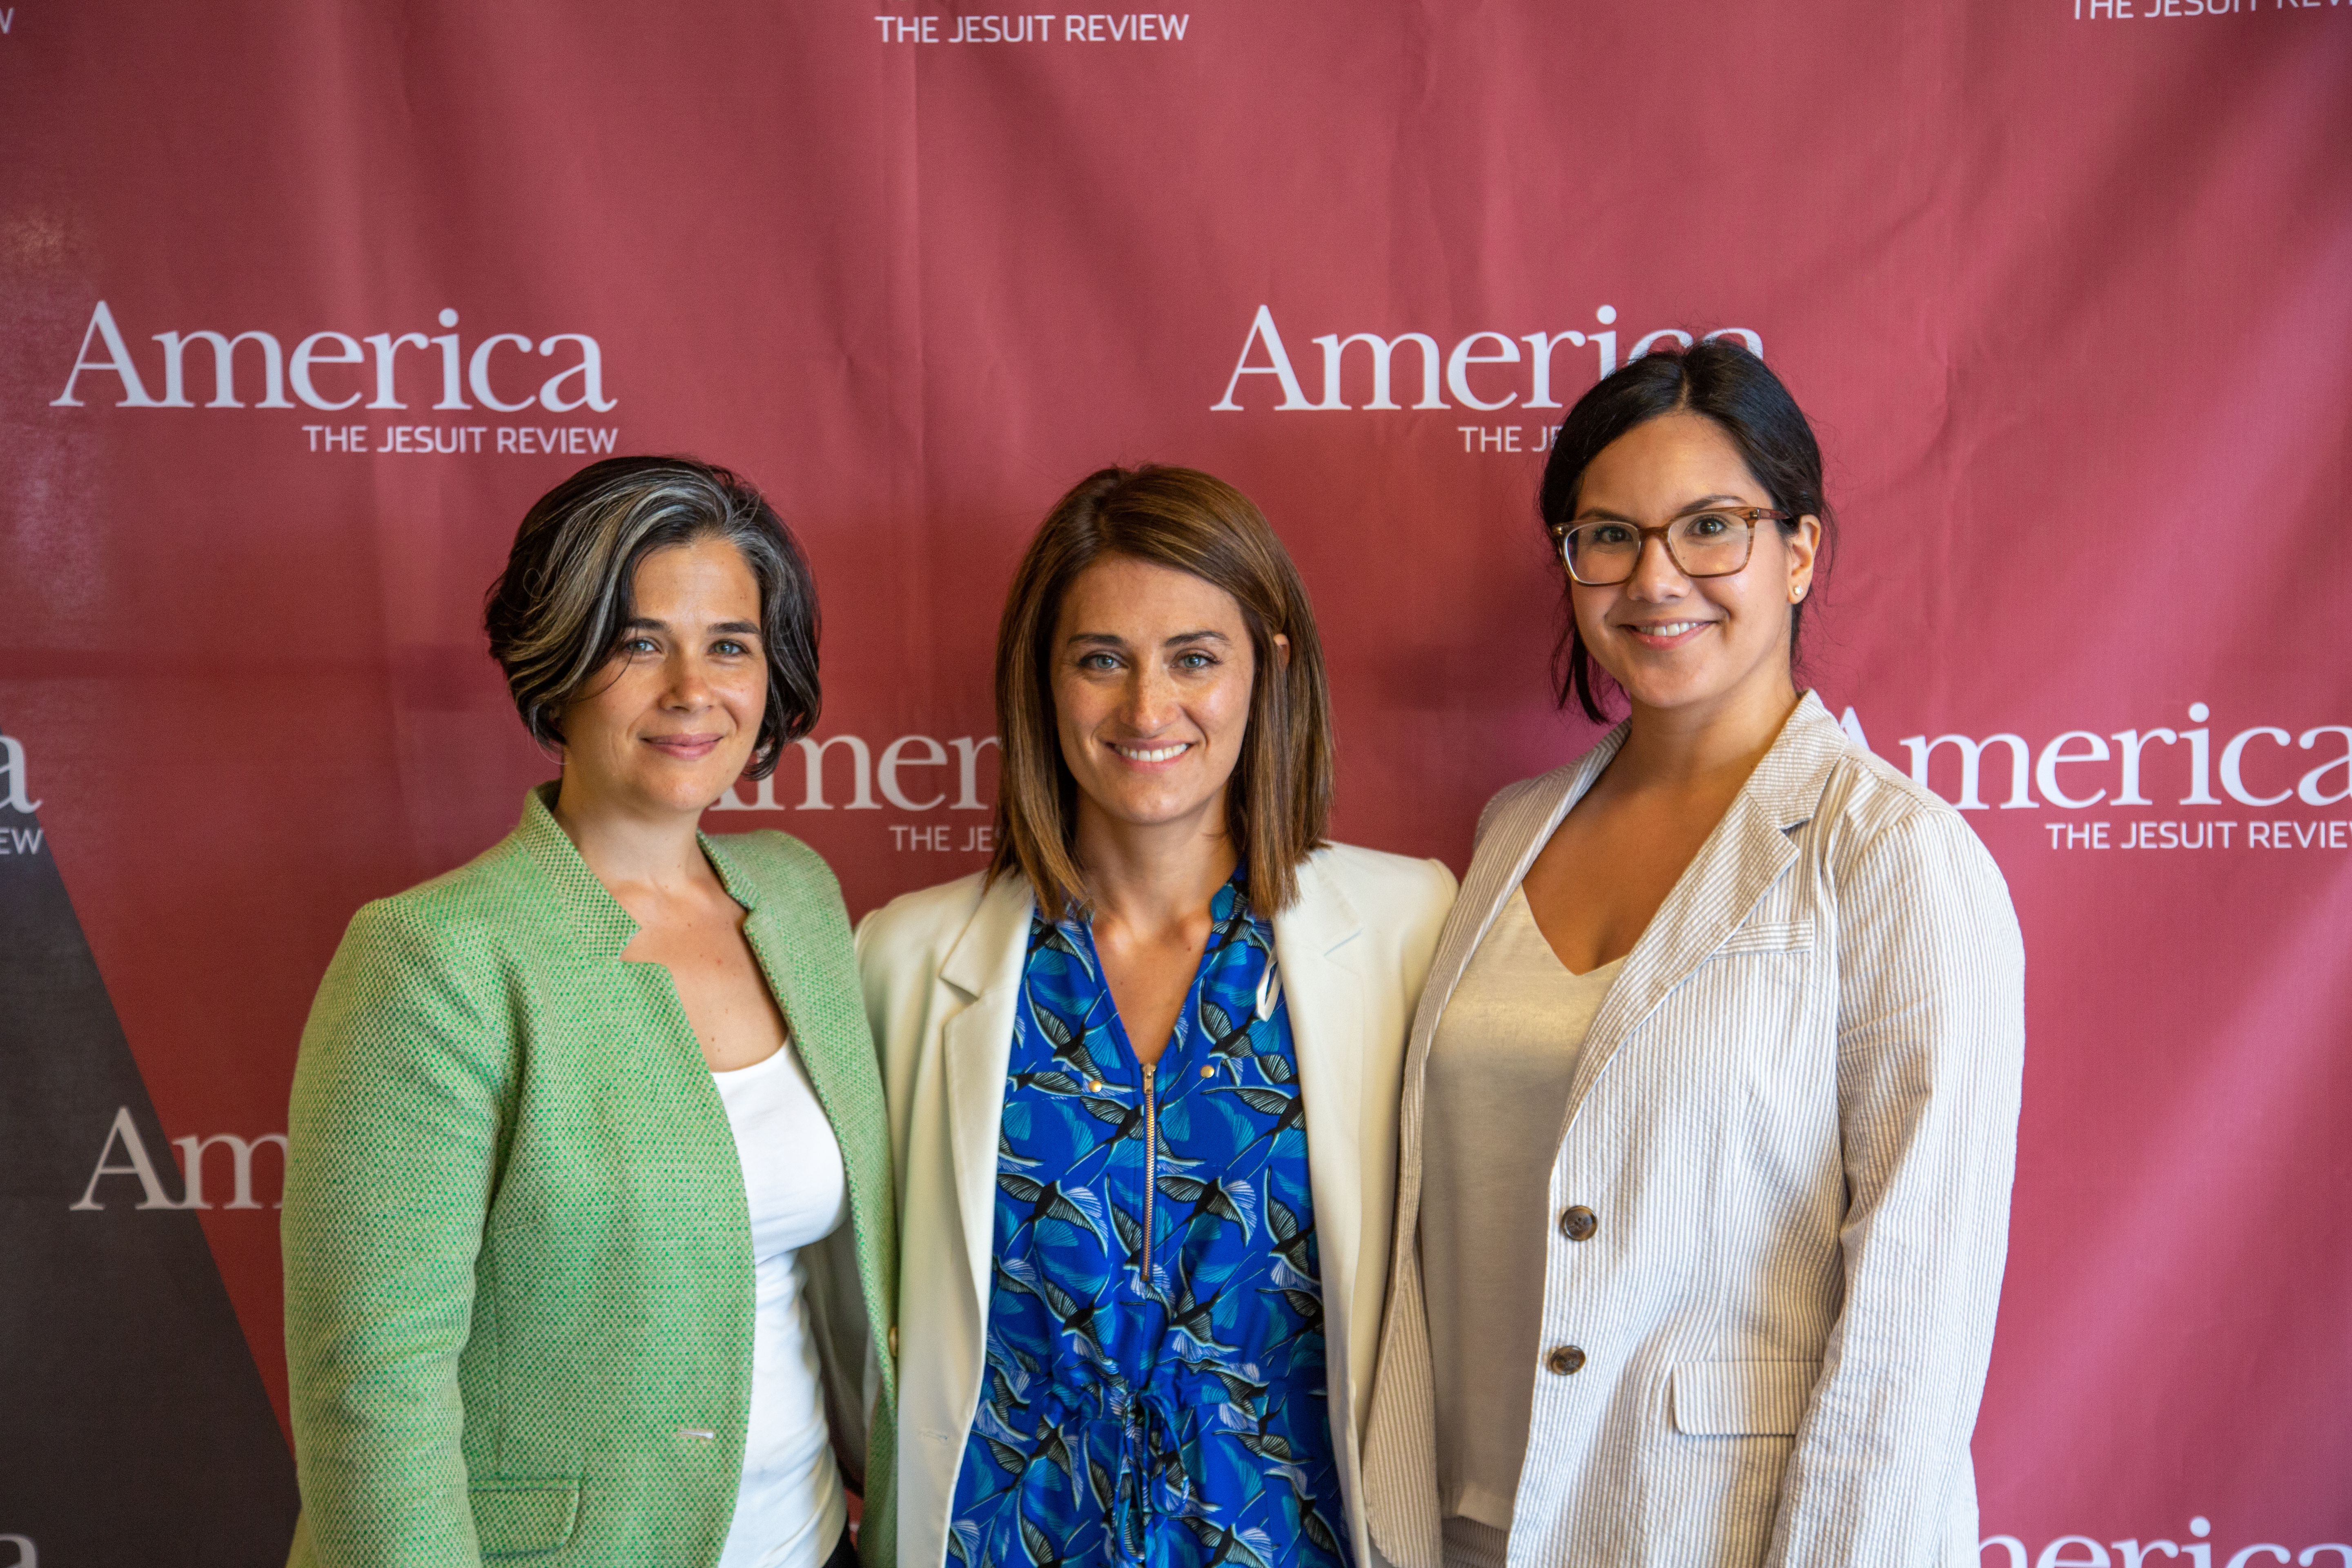 Valentina Morales, senior director of justice initiatives, The Fedcap Group, Michelle Mendez, director, Defending Vulnerable Populations Program, Catholic Legal Immigration Network, Inc. and Stephanie Macias-Arlington, executive director of the Joseph A. Unanue Latino Institute at Seton Hall University. (Mike Seay/America Media)